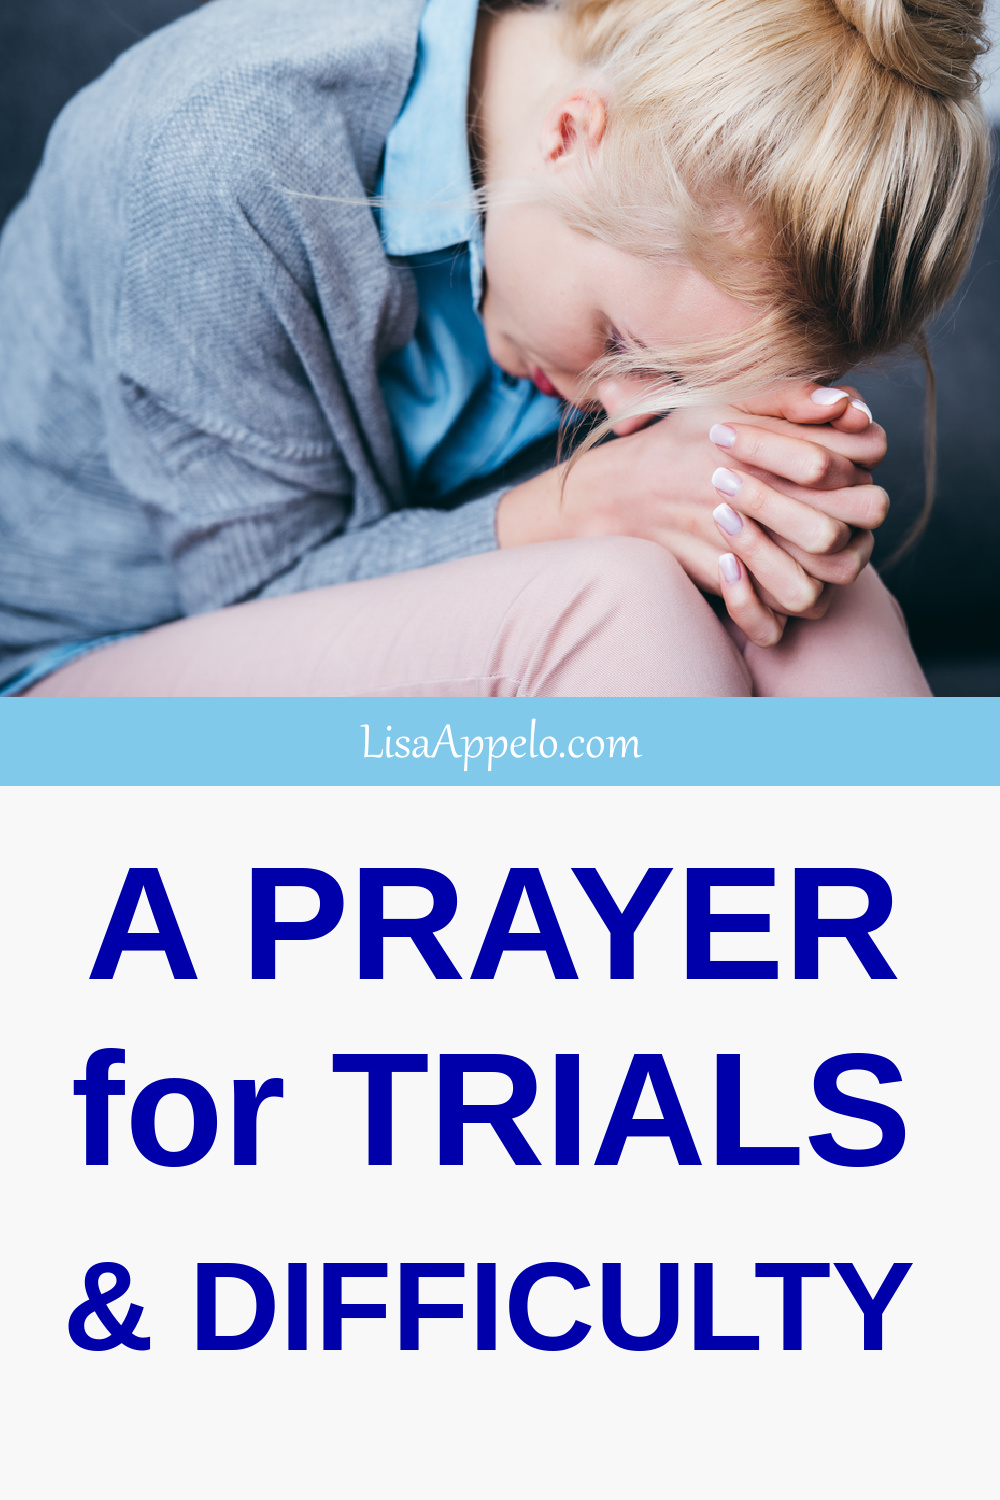 A Prayer in Trials and Difficulty